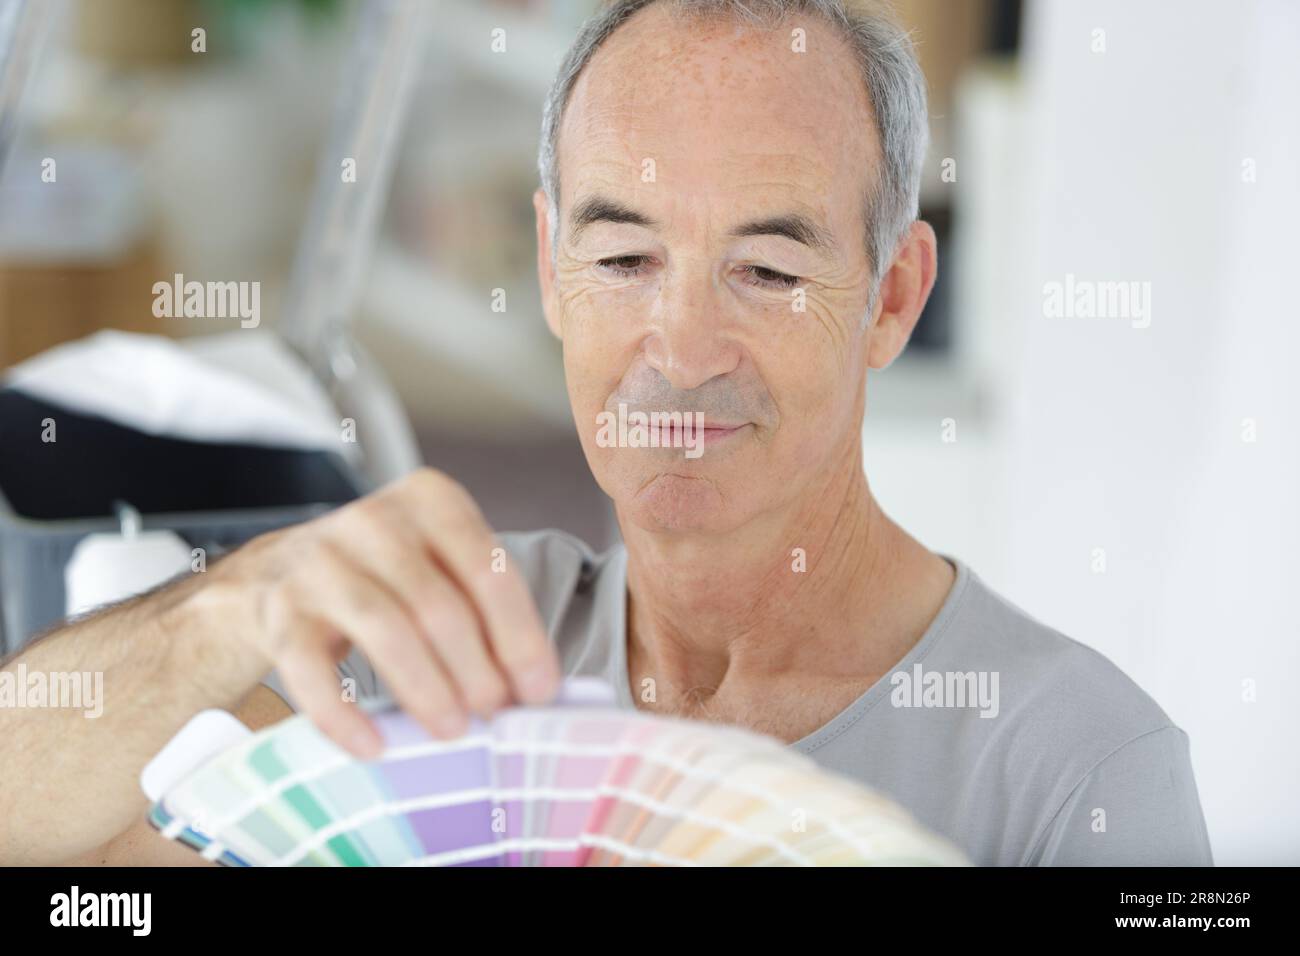 elderly man holding a color swatch Stock Photo